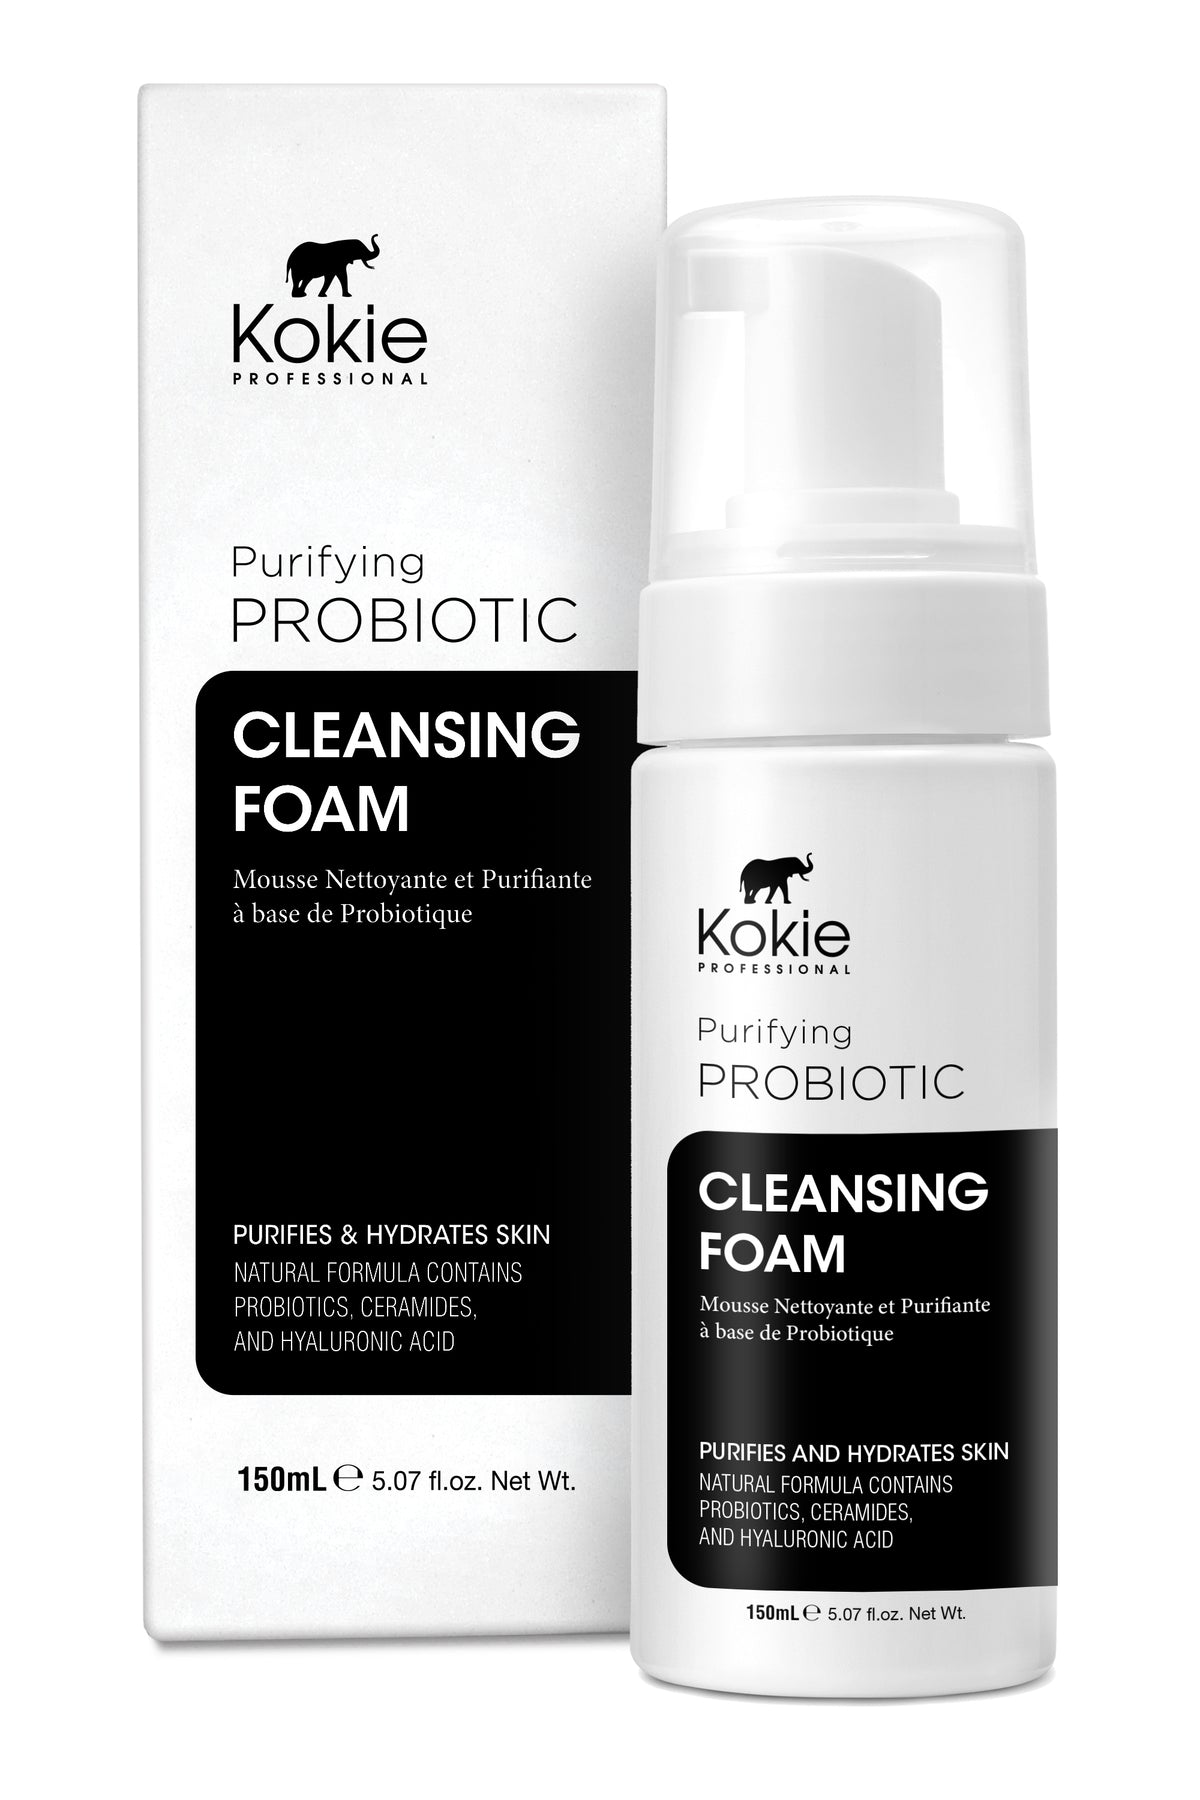 PURIFYING PROBIOTIC CLEANSING FOAM